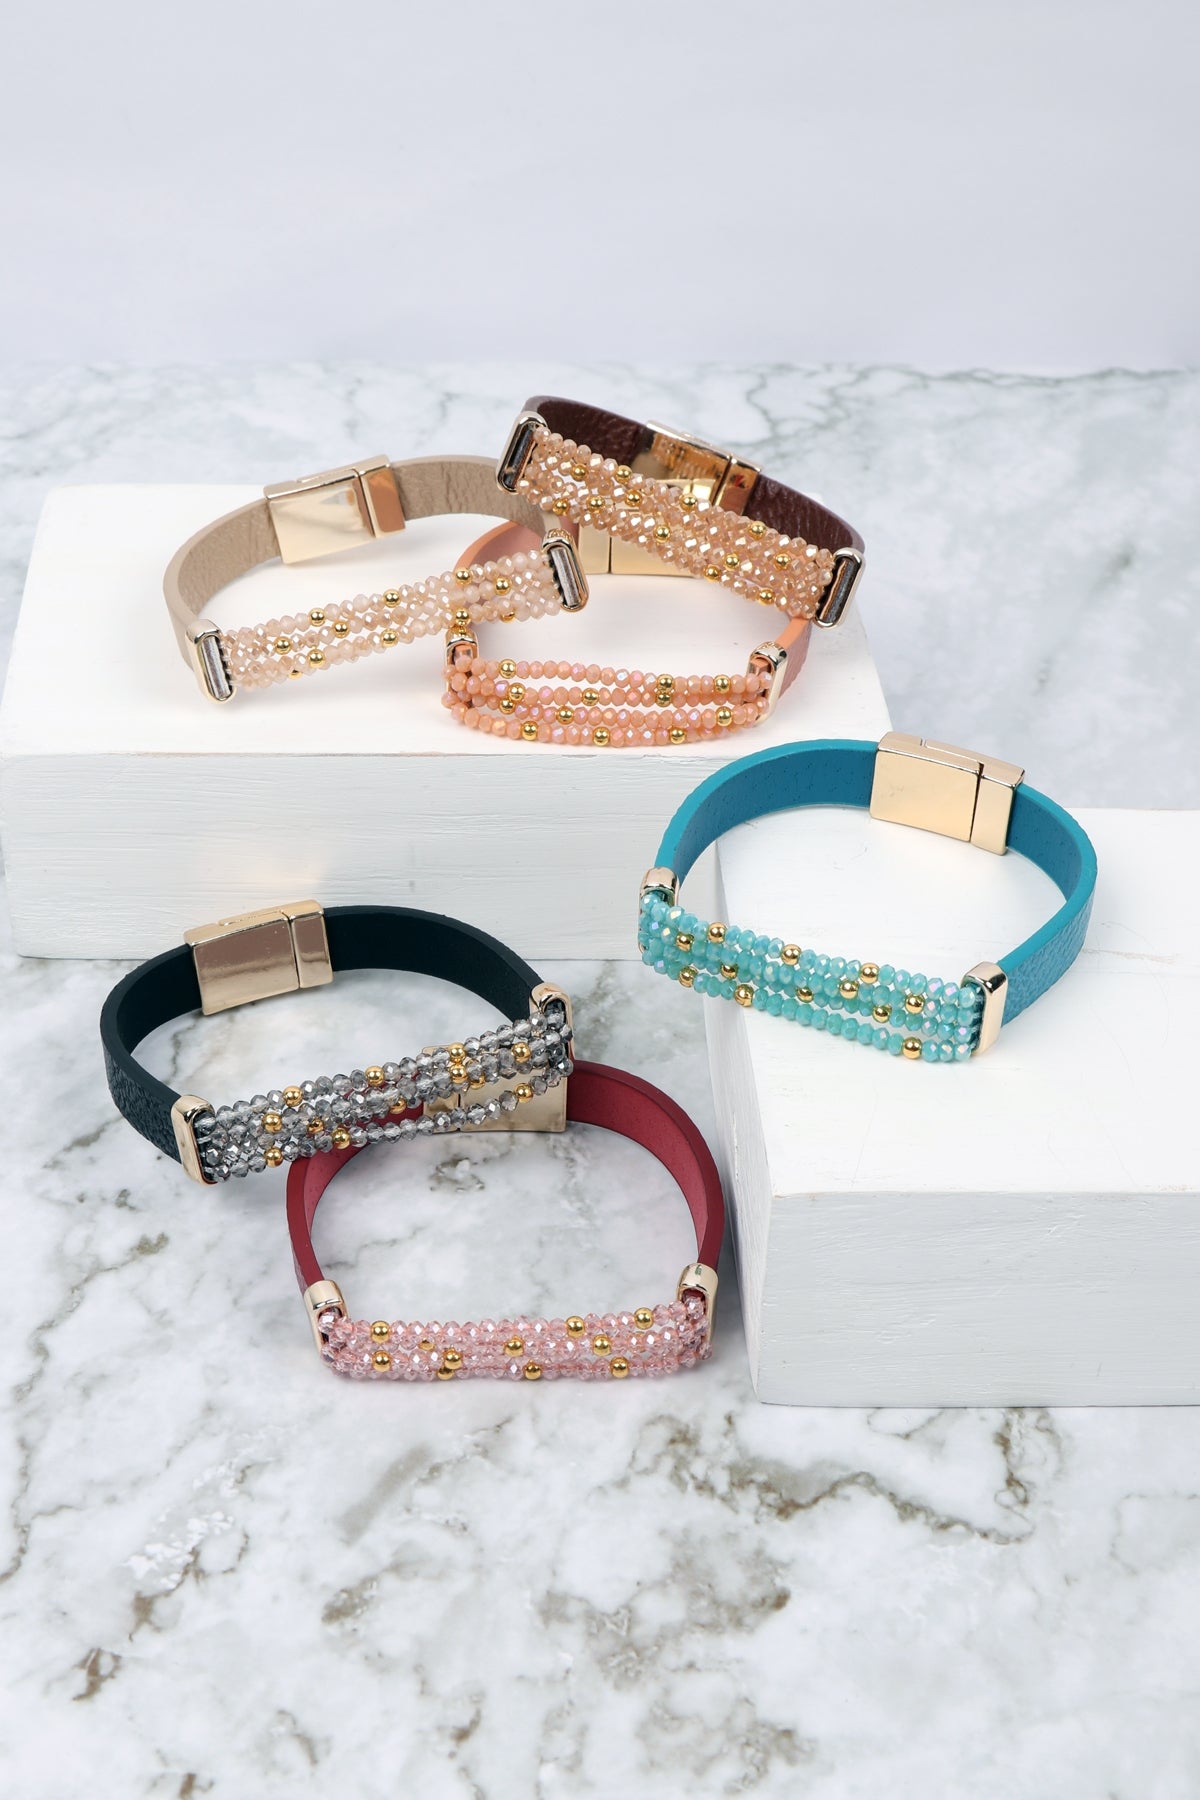 4 LINE BEADED LEATHER STRAP MAGNETIC BRACELET/6PCS (NOW $ 1.75 ONLY!)